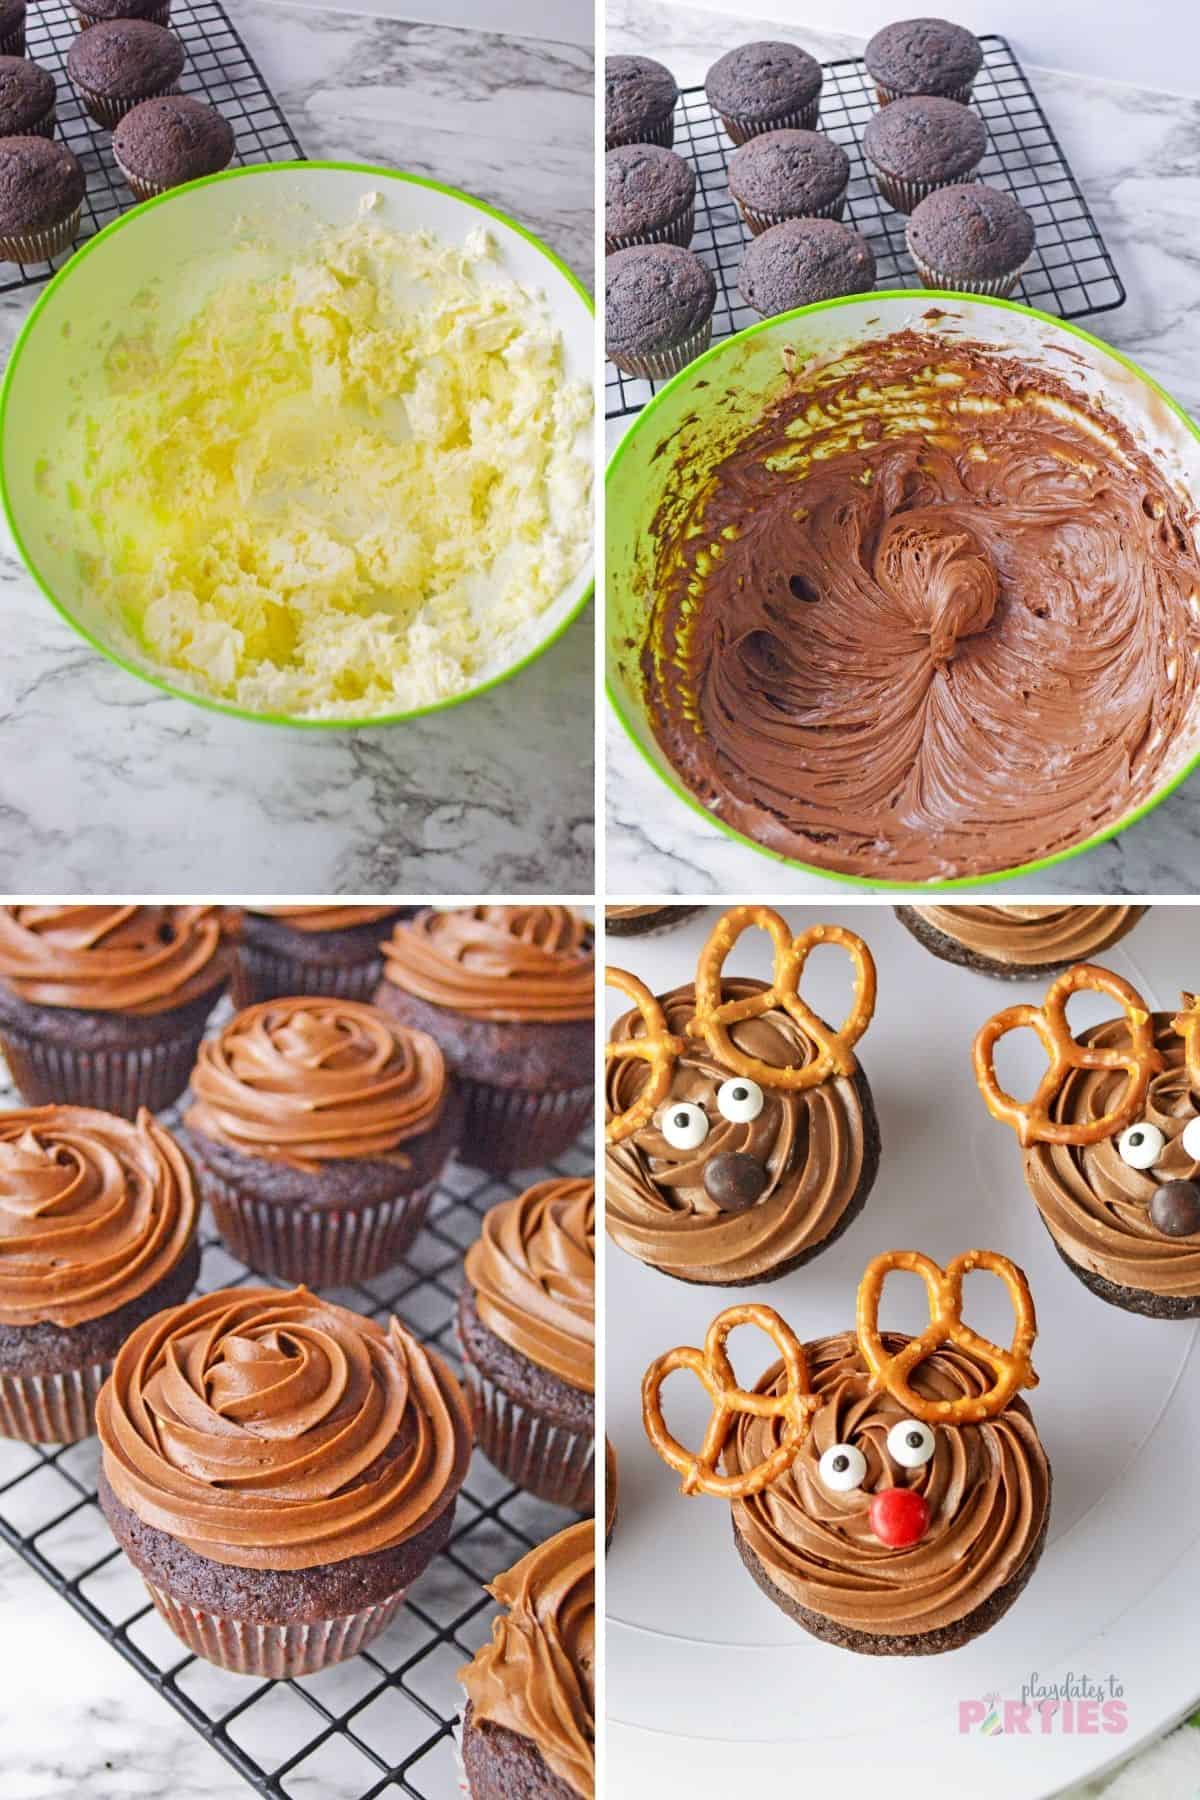 Making chocolate frosting and decorating chocolate cupcakes.